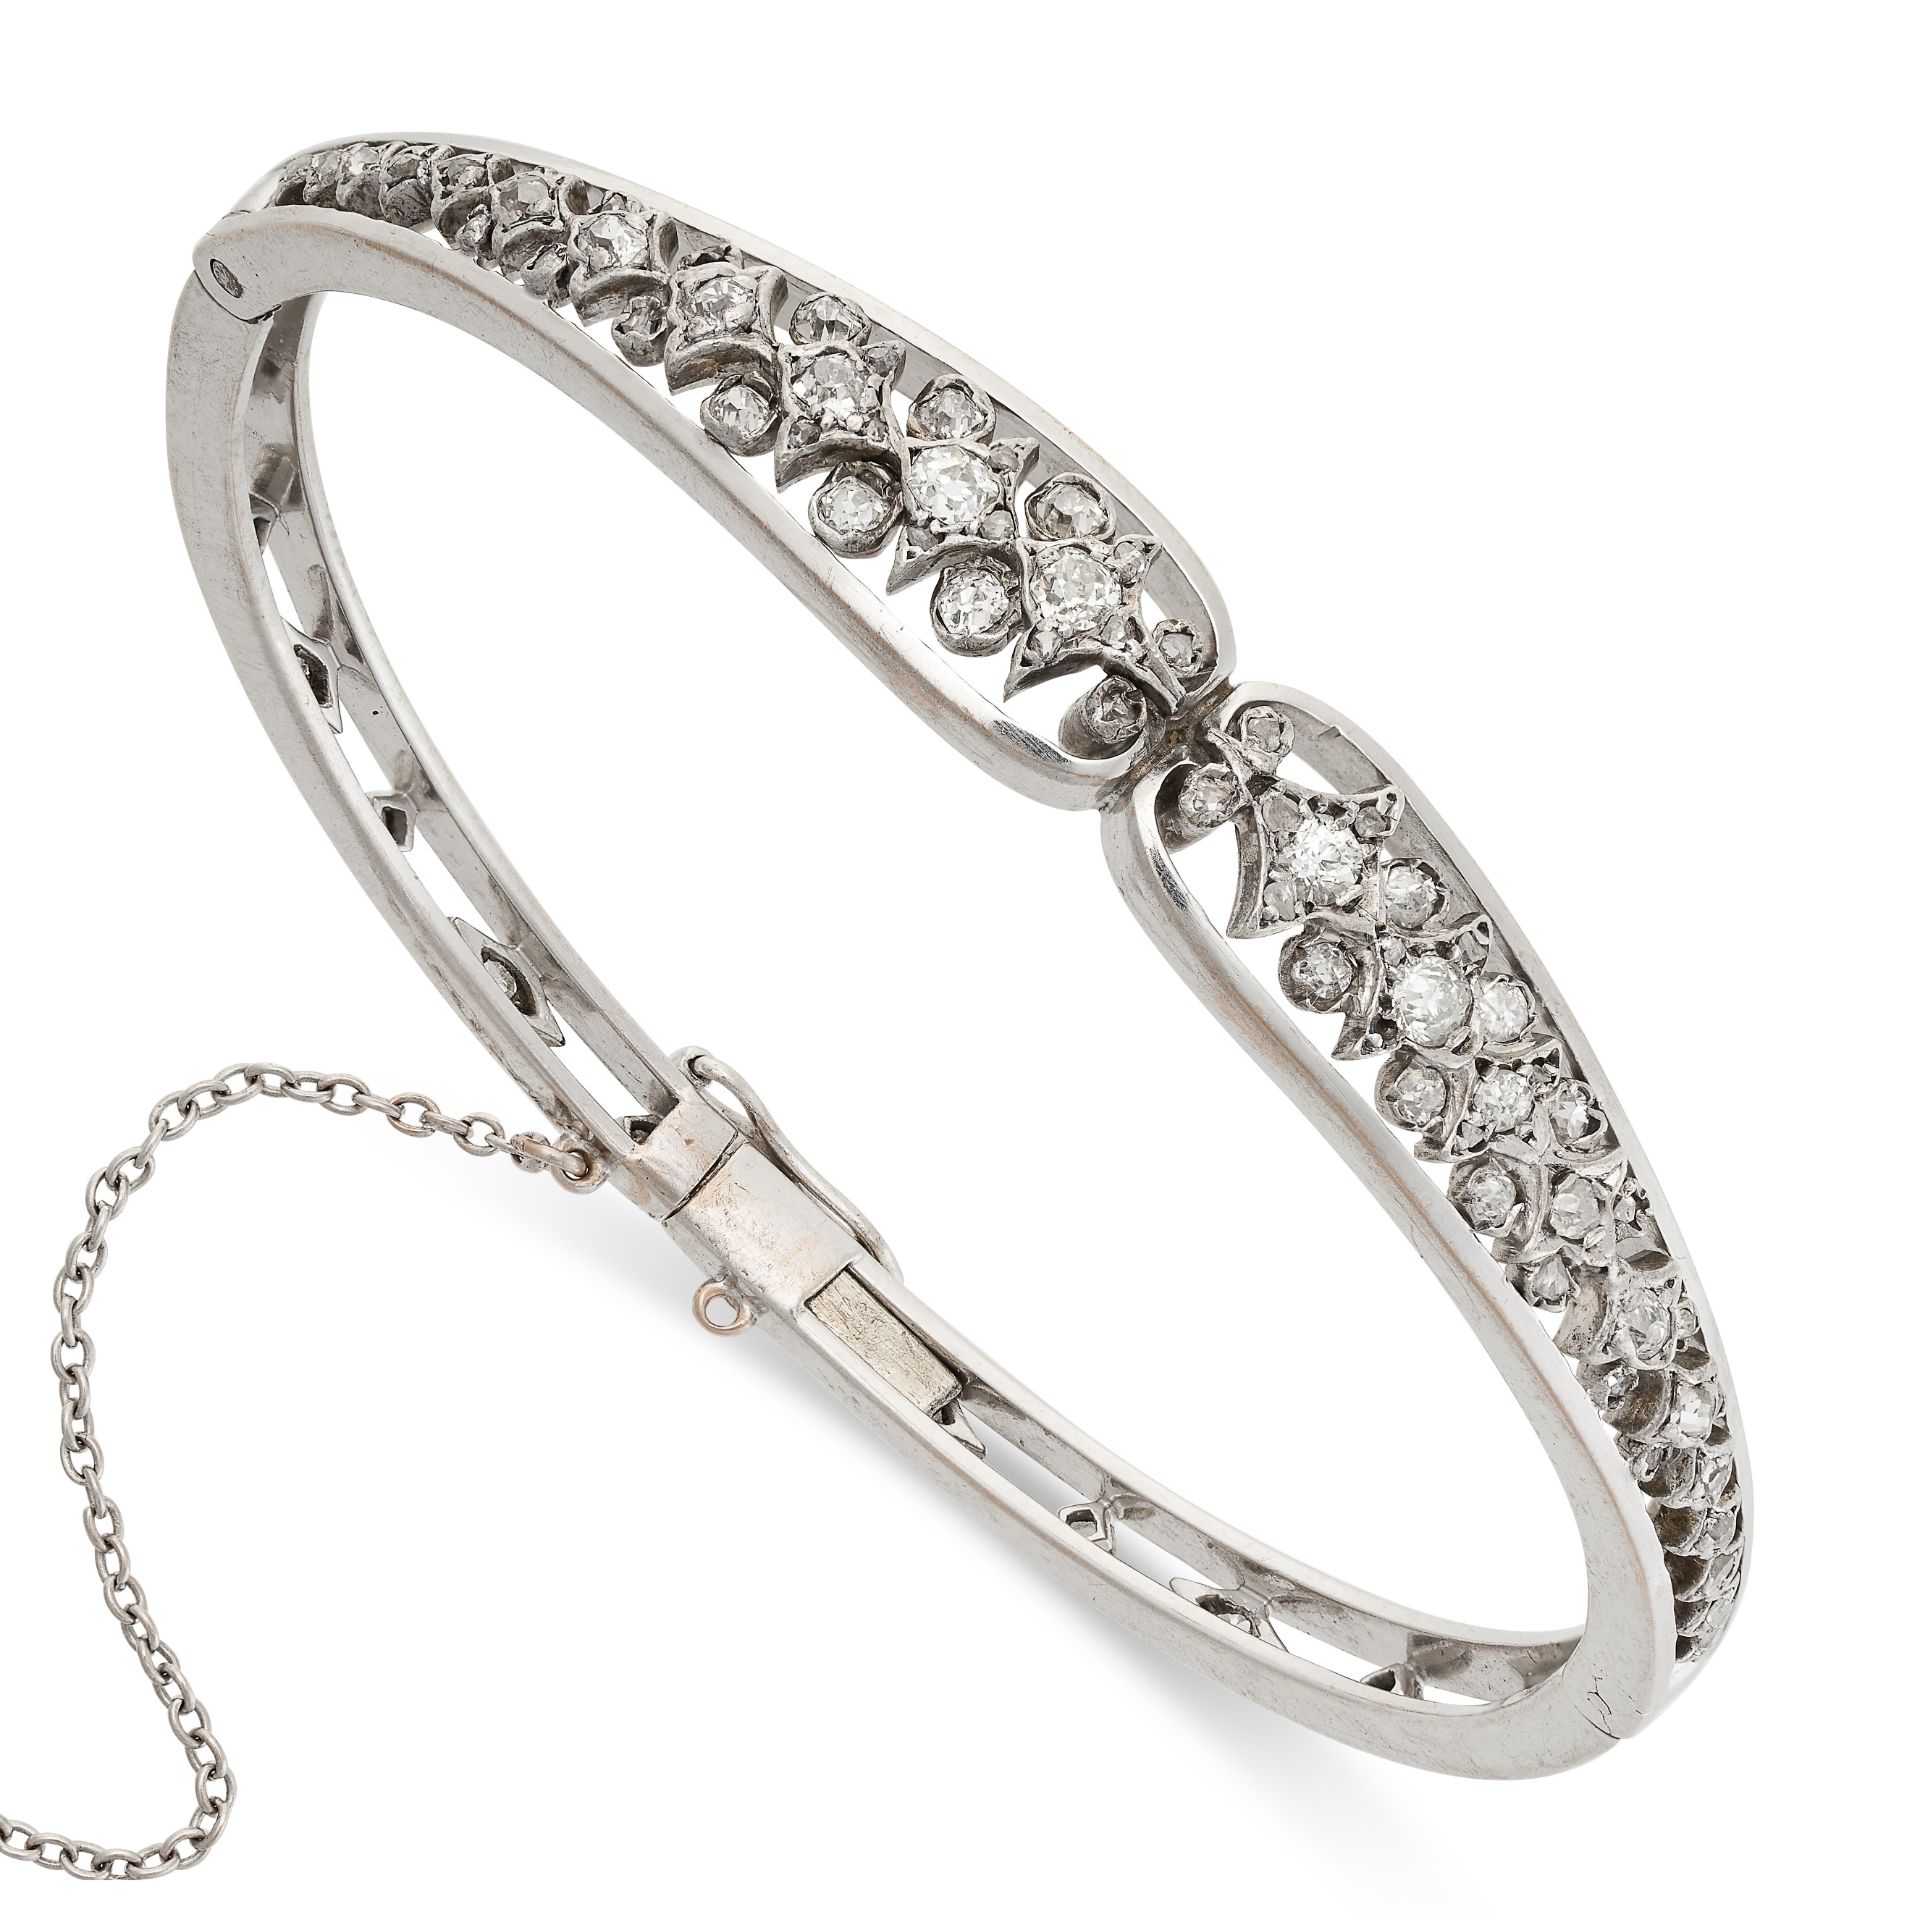 AN ANTIQUE DIAMOND BANGLE, EARLY 20TH CENTURY the foliate motifs set with a row of old cut